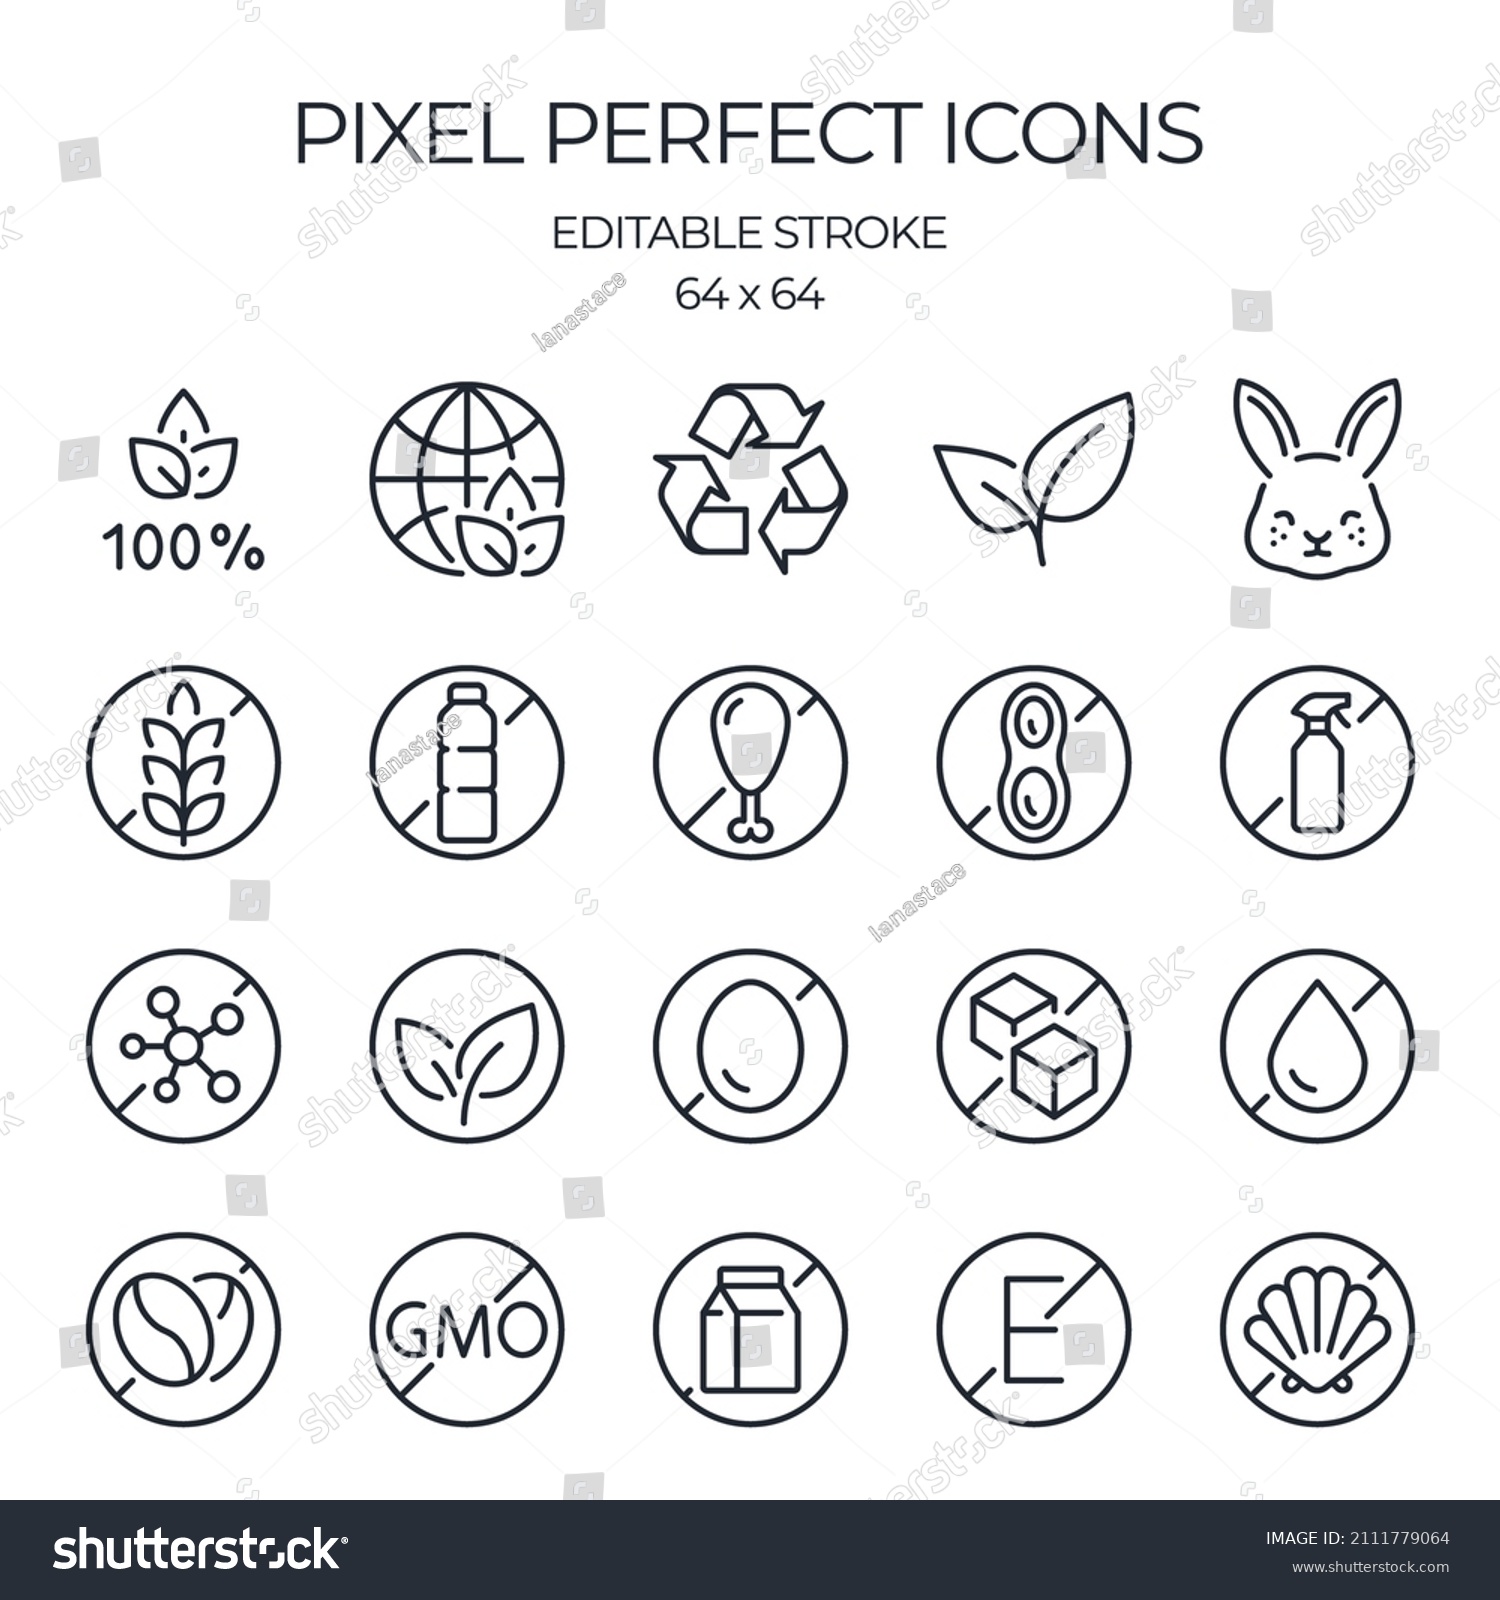 SVG of Eco, vegan, vegetarian, and allergens related editable stroke outline icons set isolated on white background flat vector illustration. Pixel perfect. 64 x 64. svg